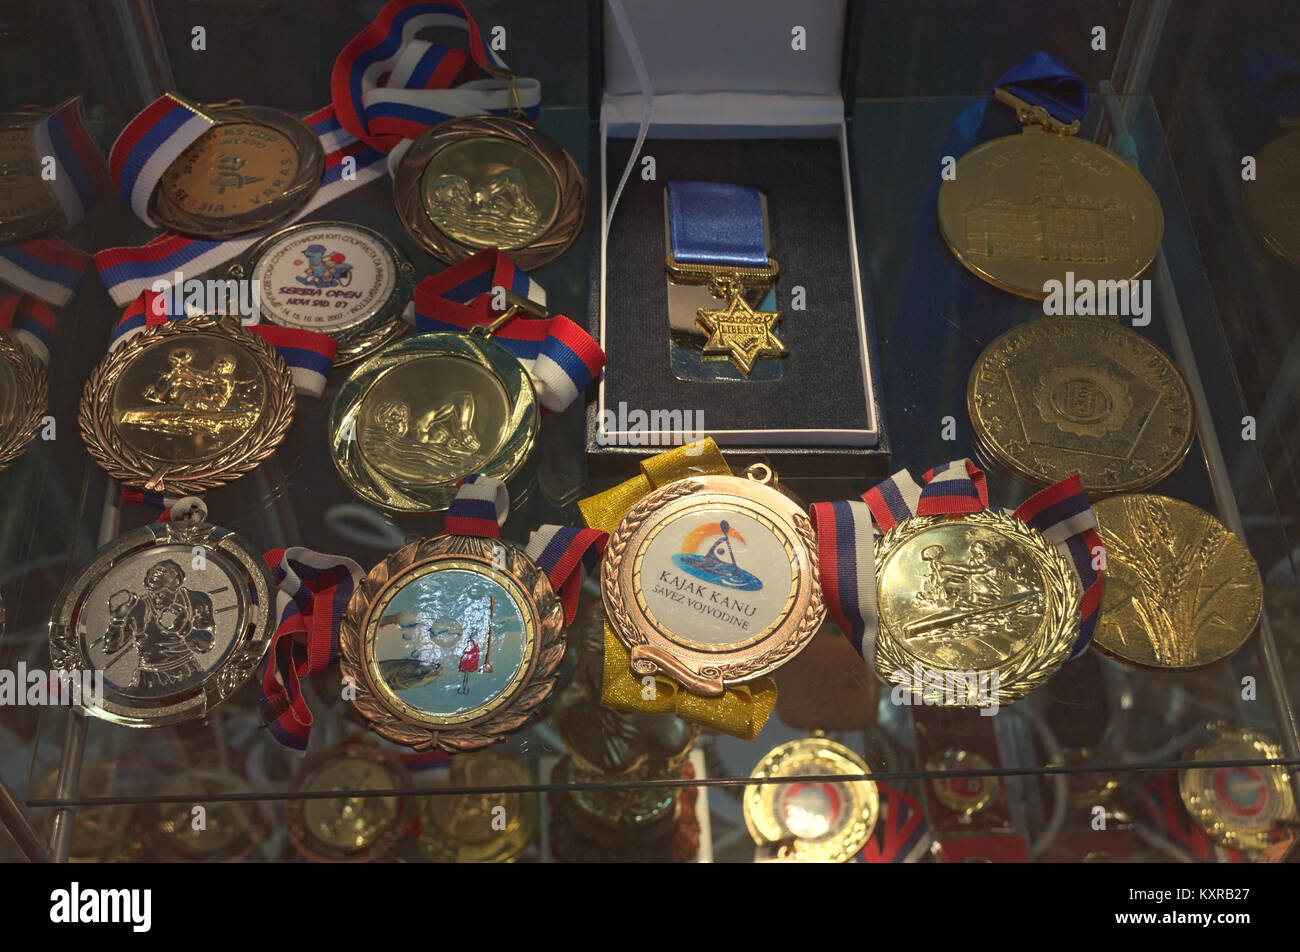 Showing of various medals dedicated to Novi Sad, Serbia Stock Photo